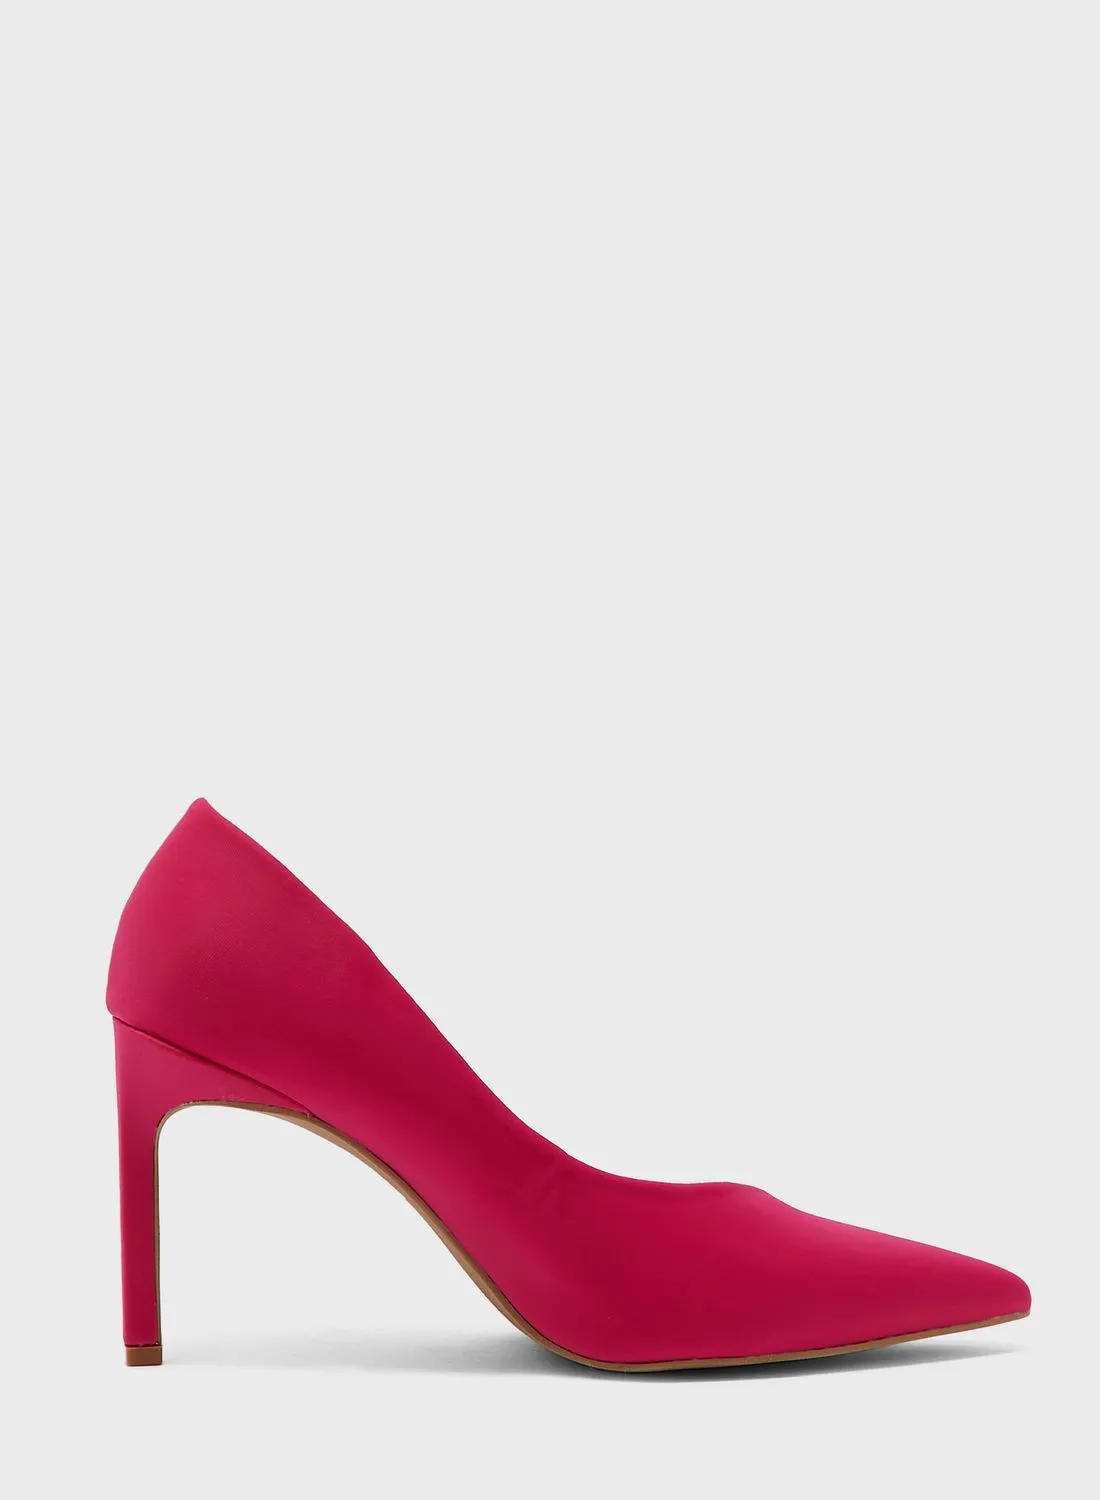 Truffle Pointed Pump